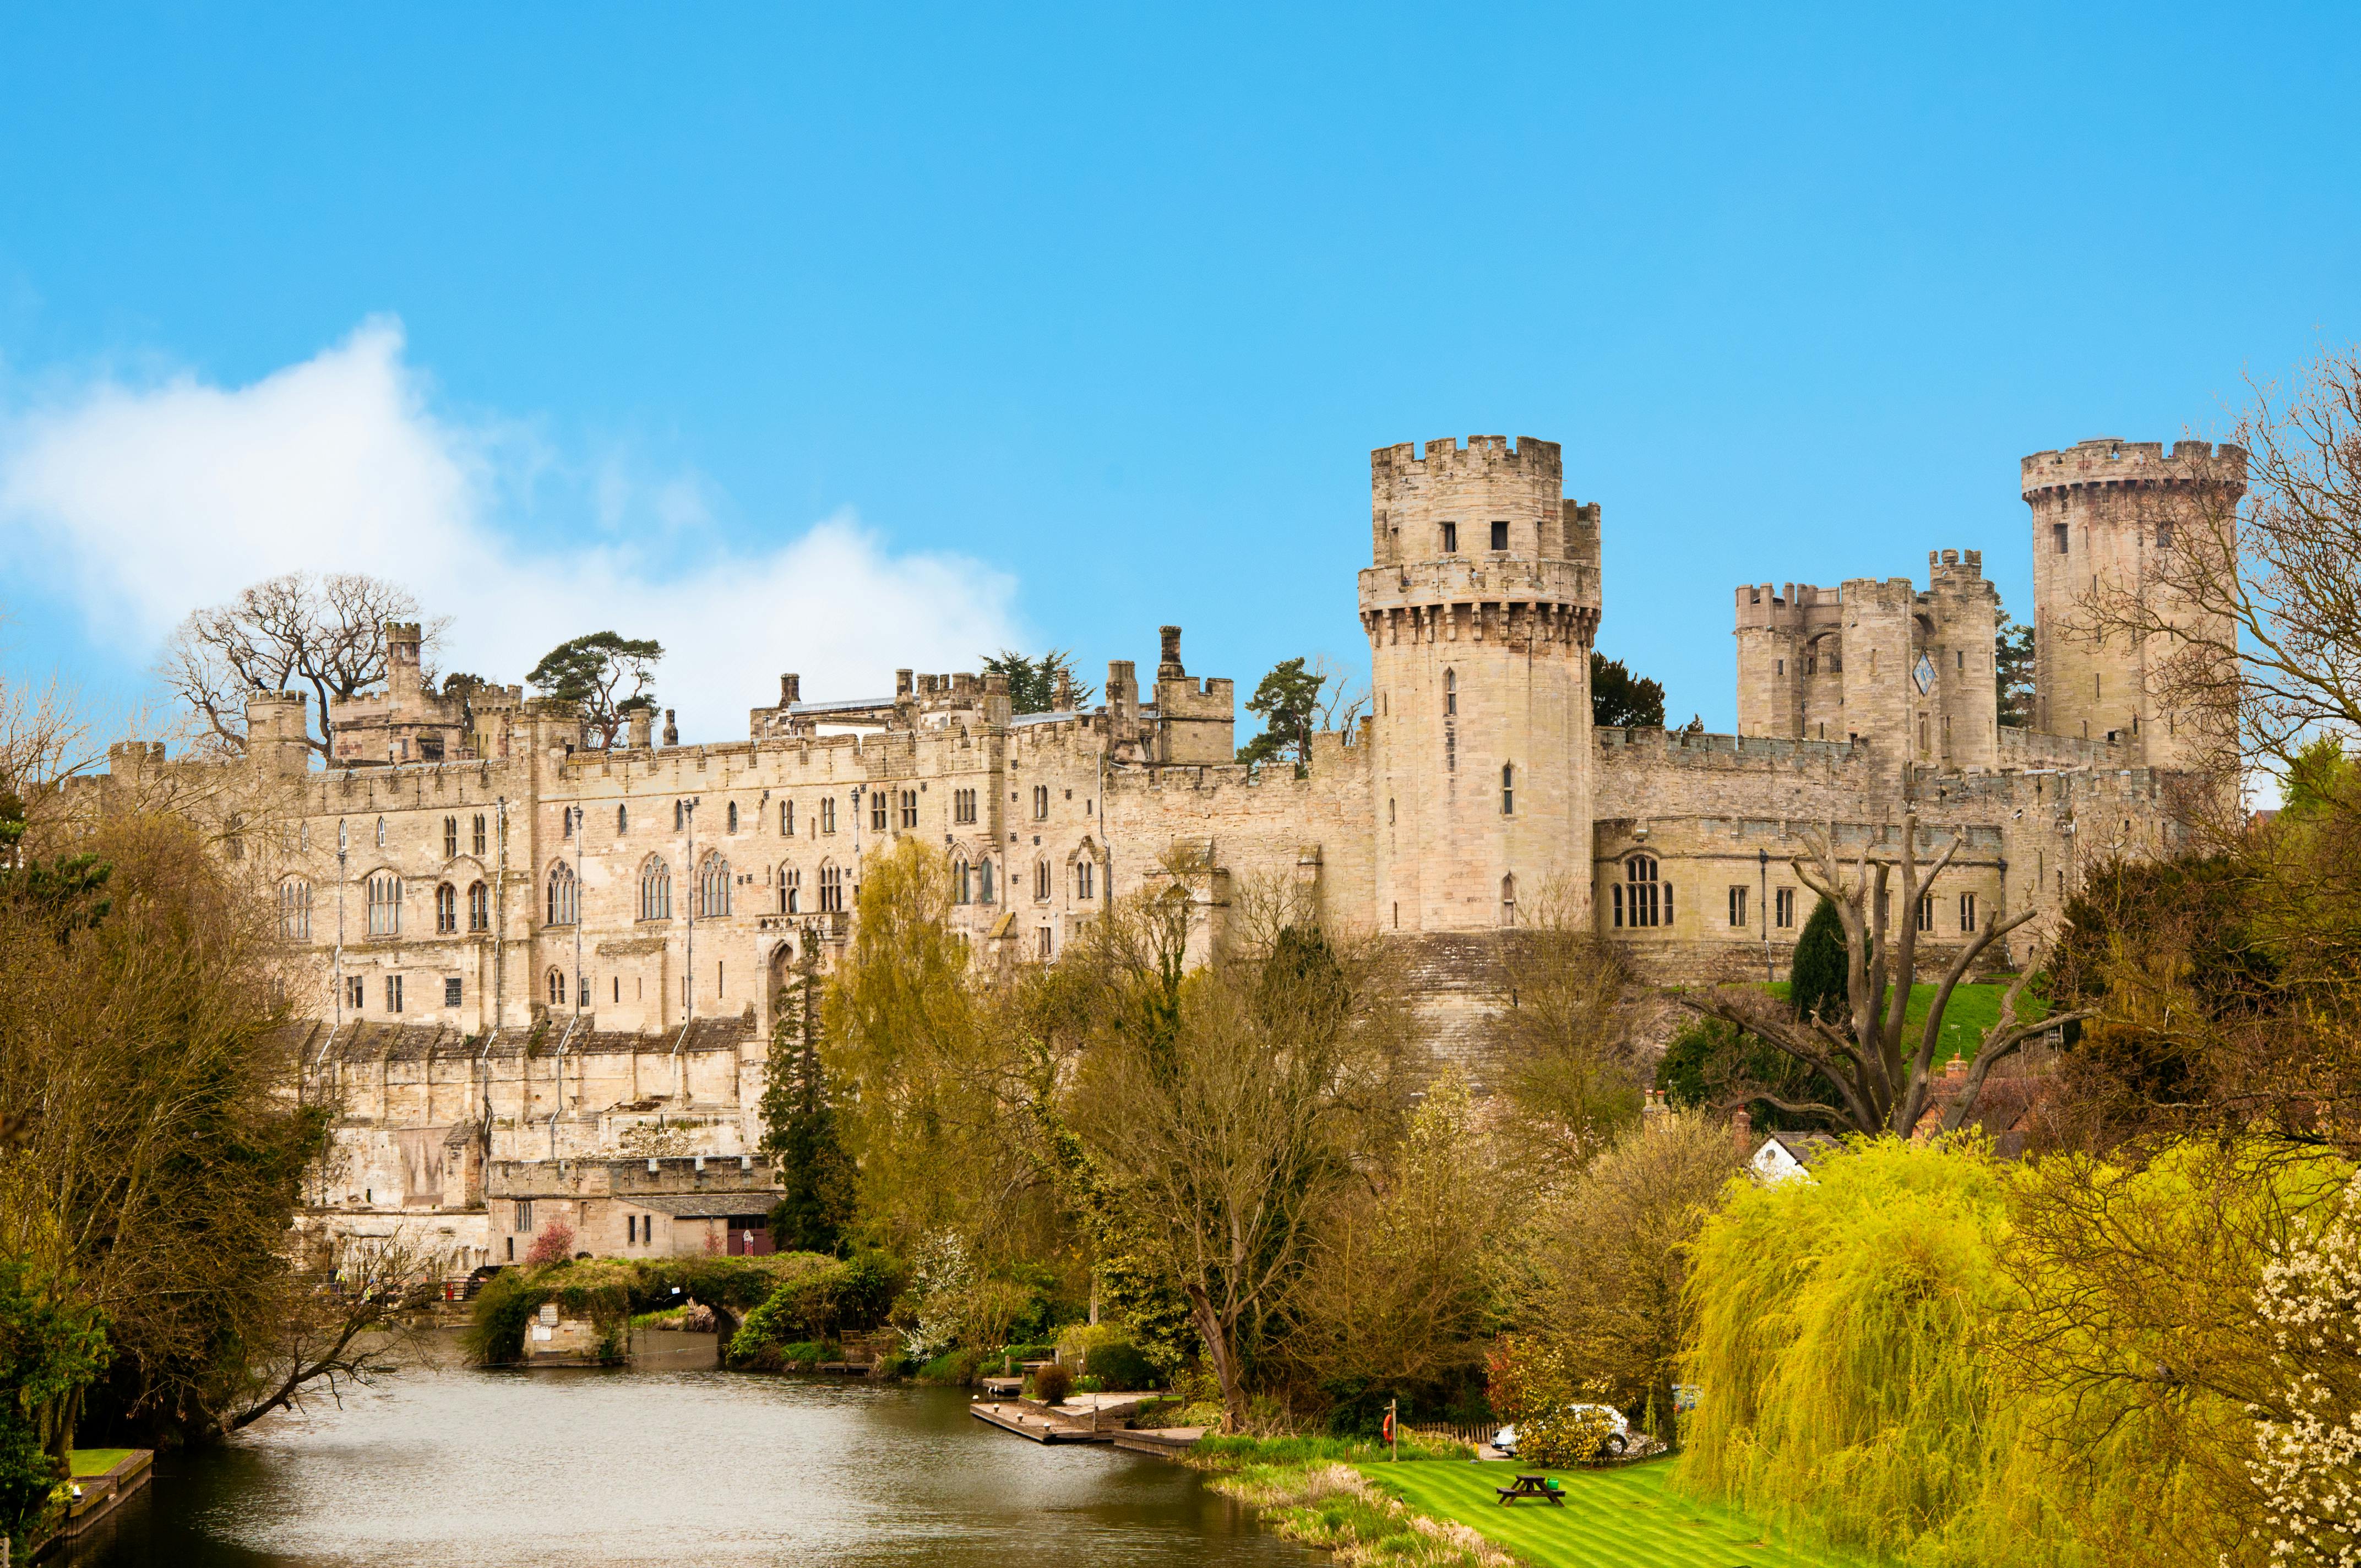 Warwick Castle, Stratford, Oxford and the Cotswolds tour